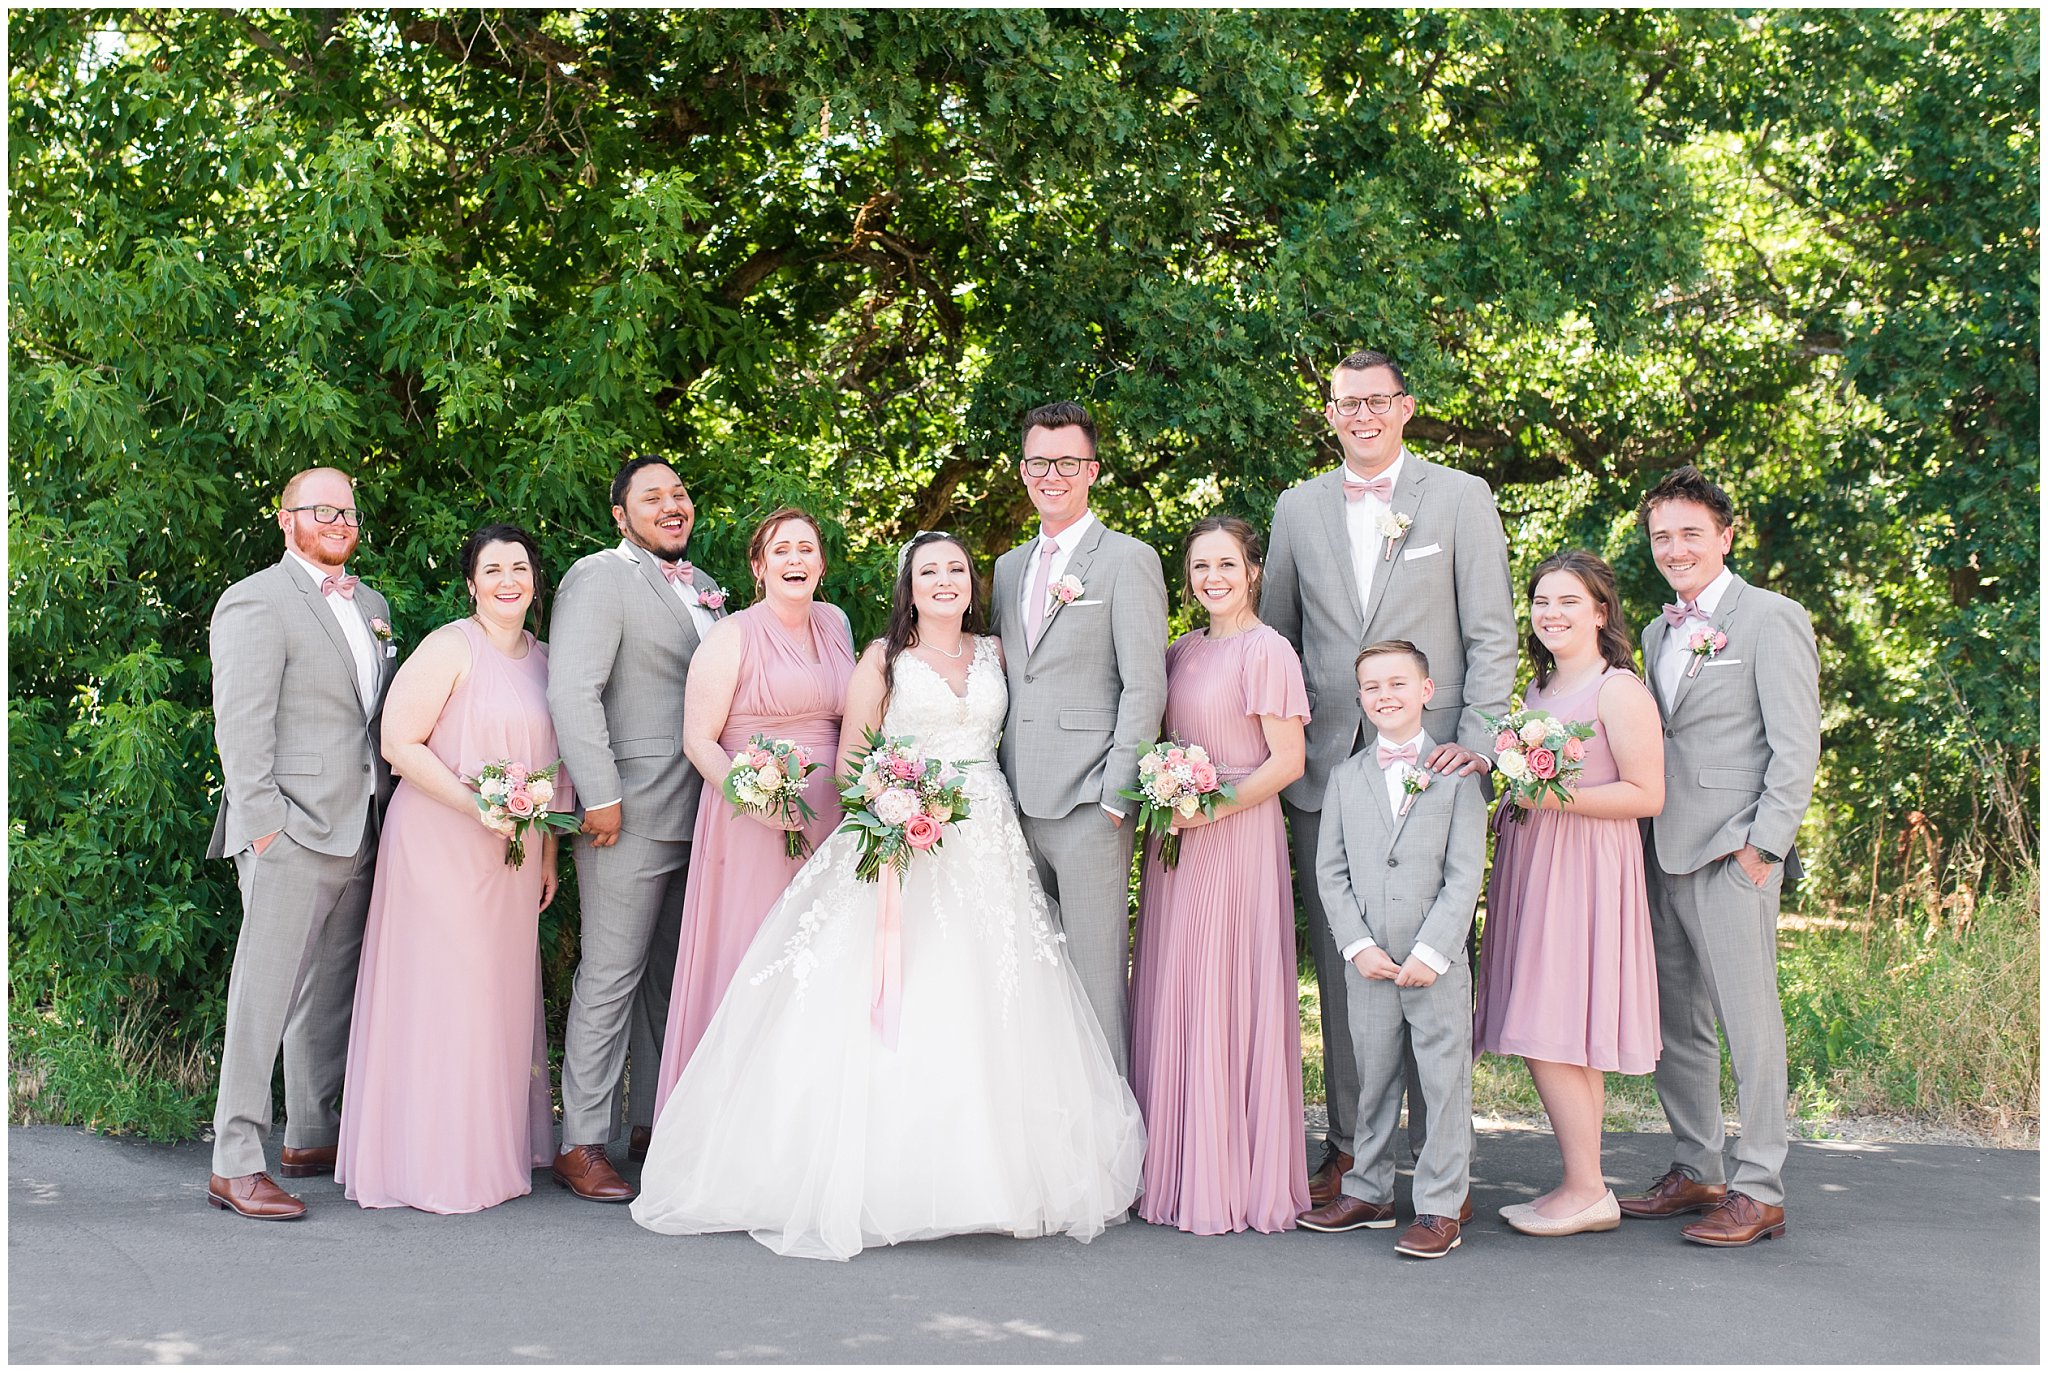 Wedding party in gray suits and dusty rose blush dresses | Oak Hills Utah Dusty Rose and Gray Summer Wedding | Jessie and Dallin Photography